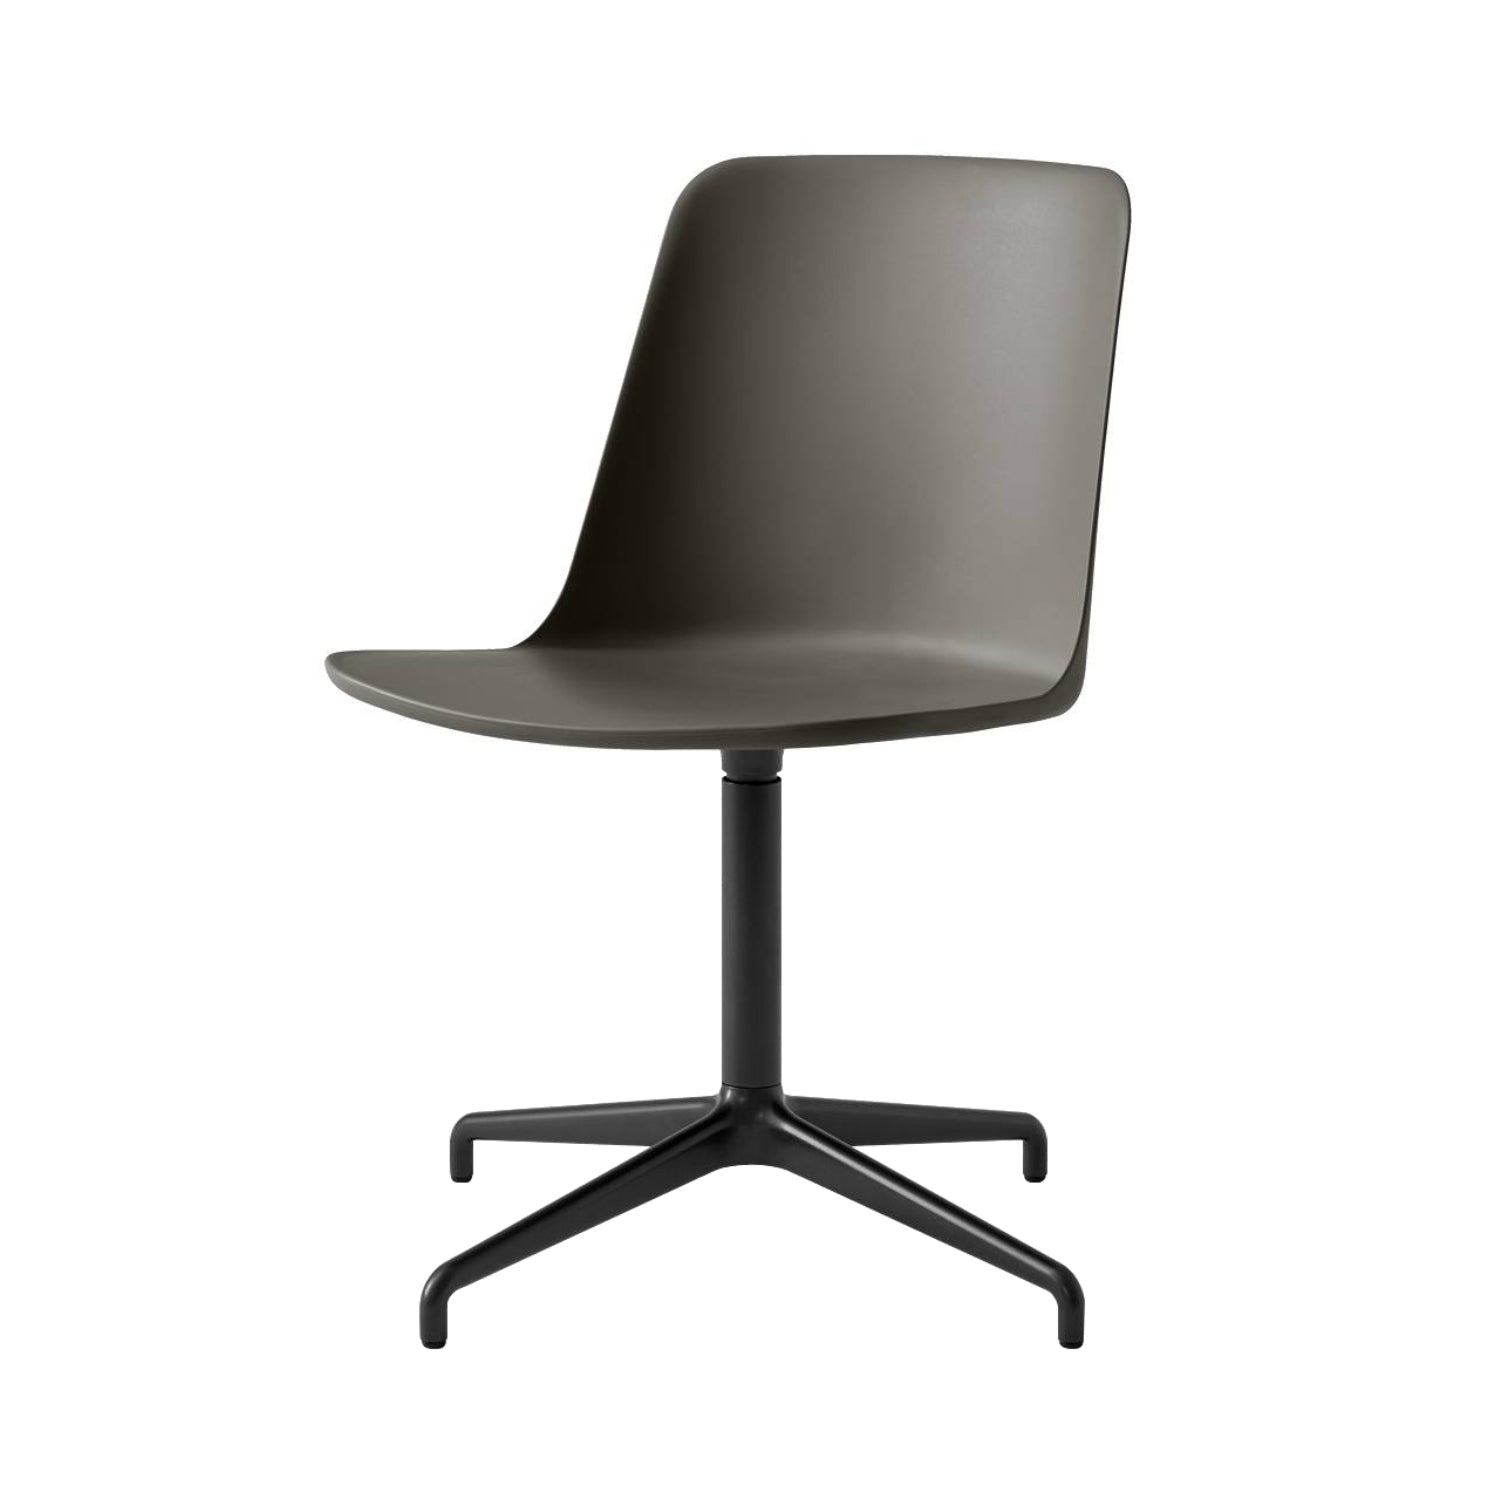 Rely Chair HW16: Stone Grey + Black